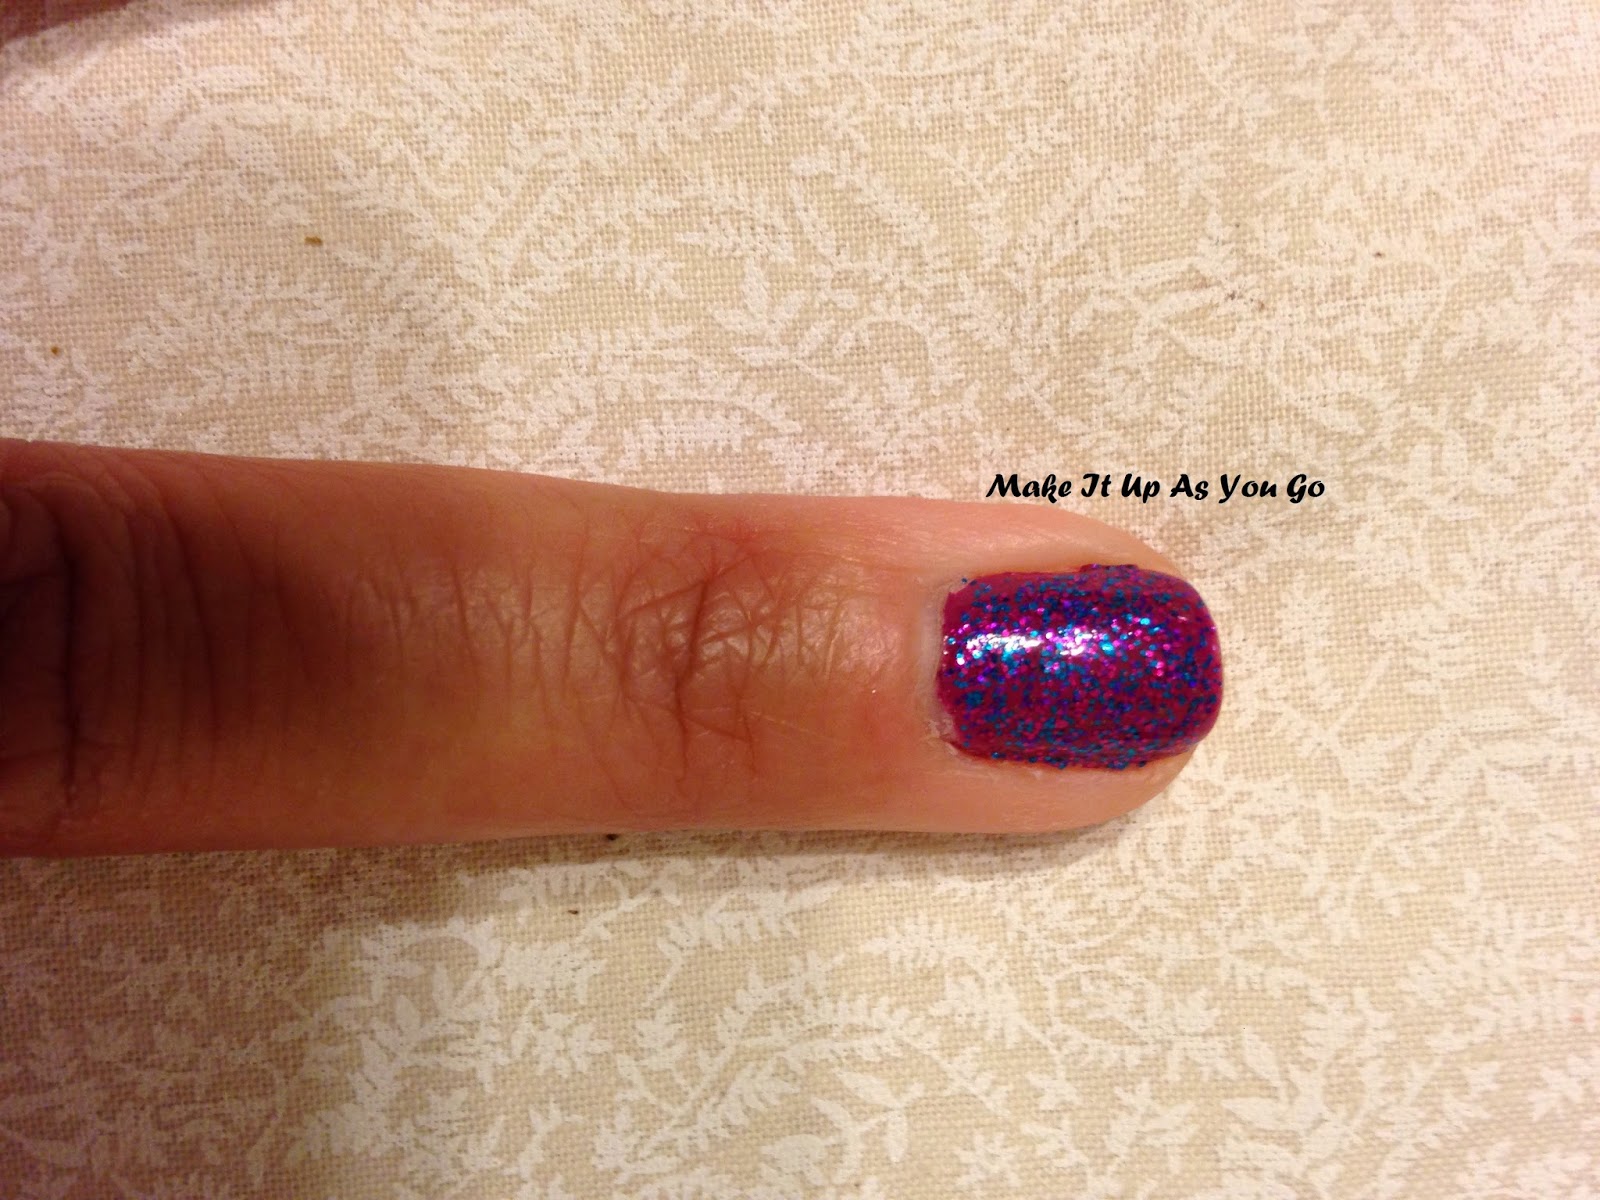 Wet n Wild Megalast Nail Polish in "Through the Grapevine" - wide 2